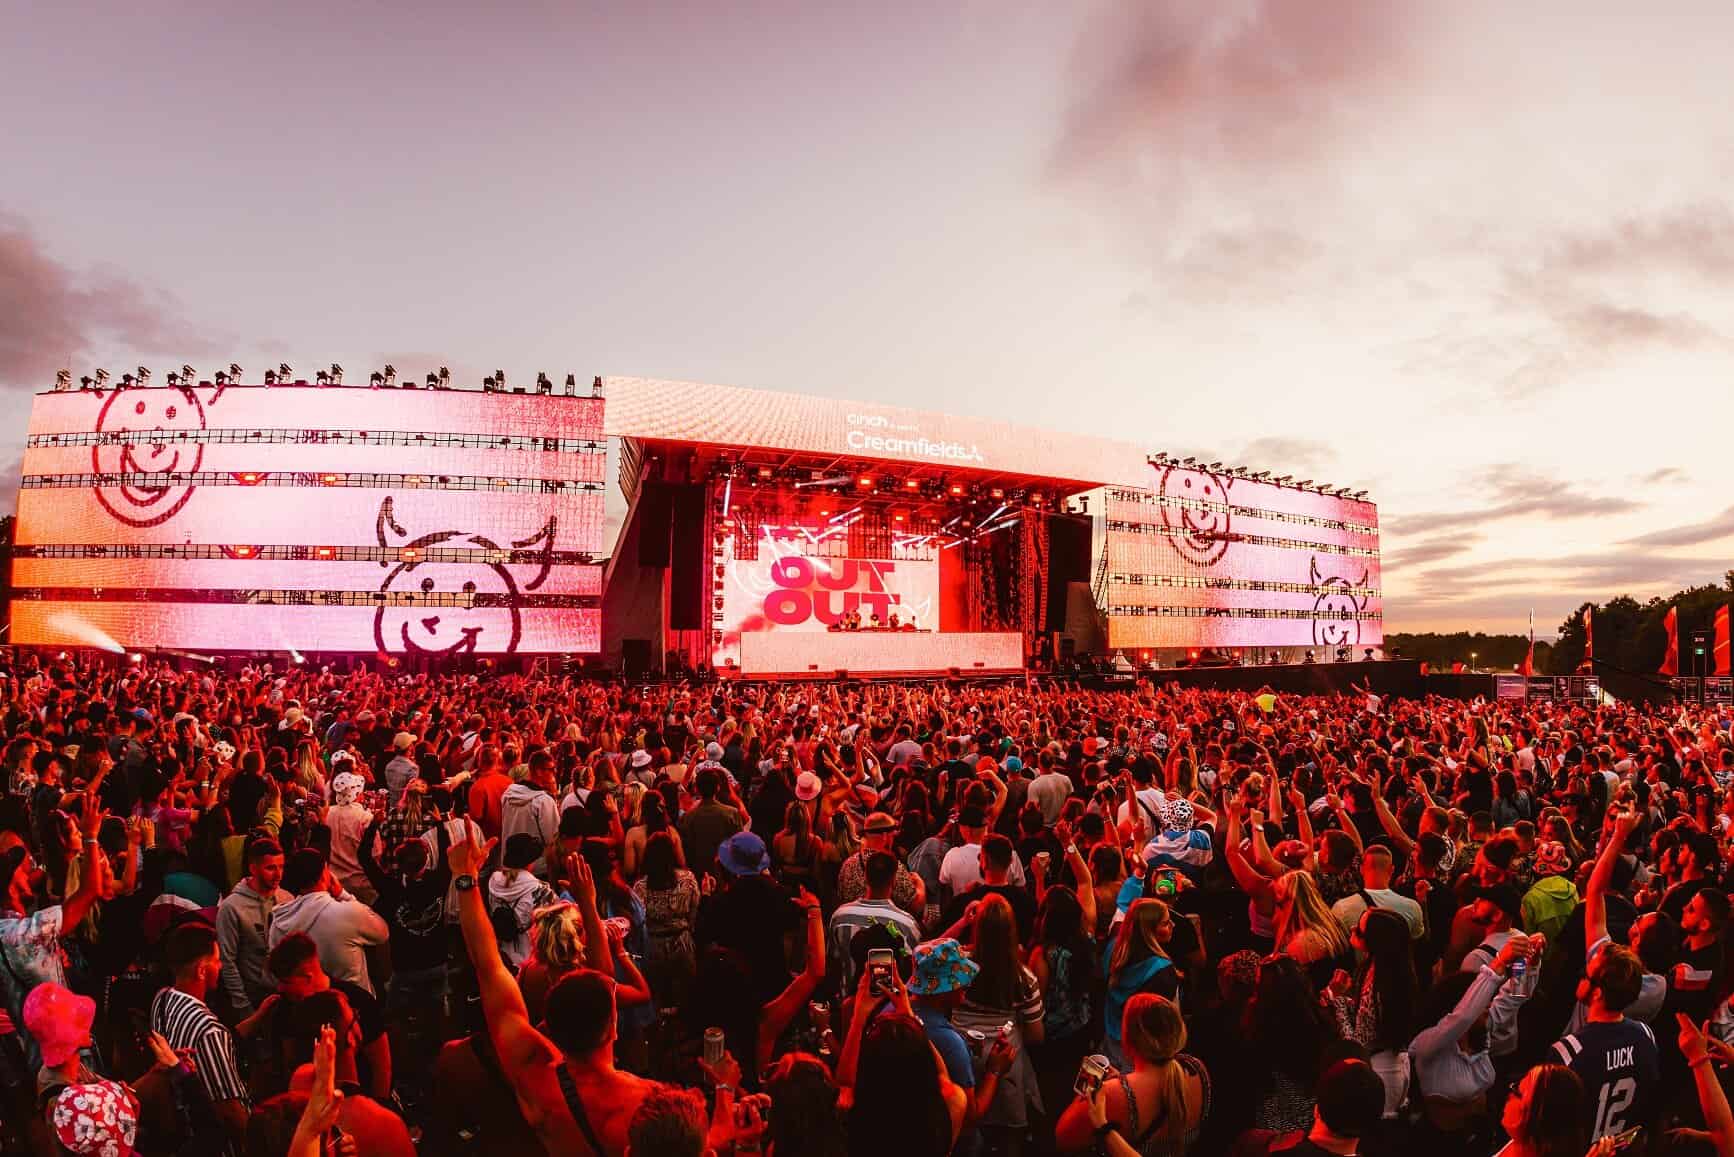 50% of UK concert-goers are at risk for hearing loss, according to new stury